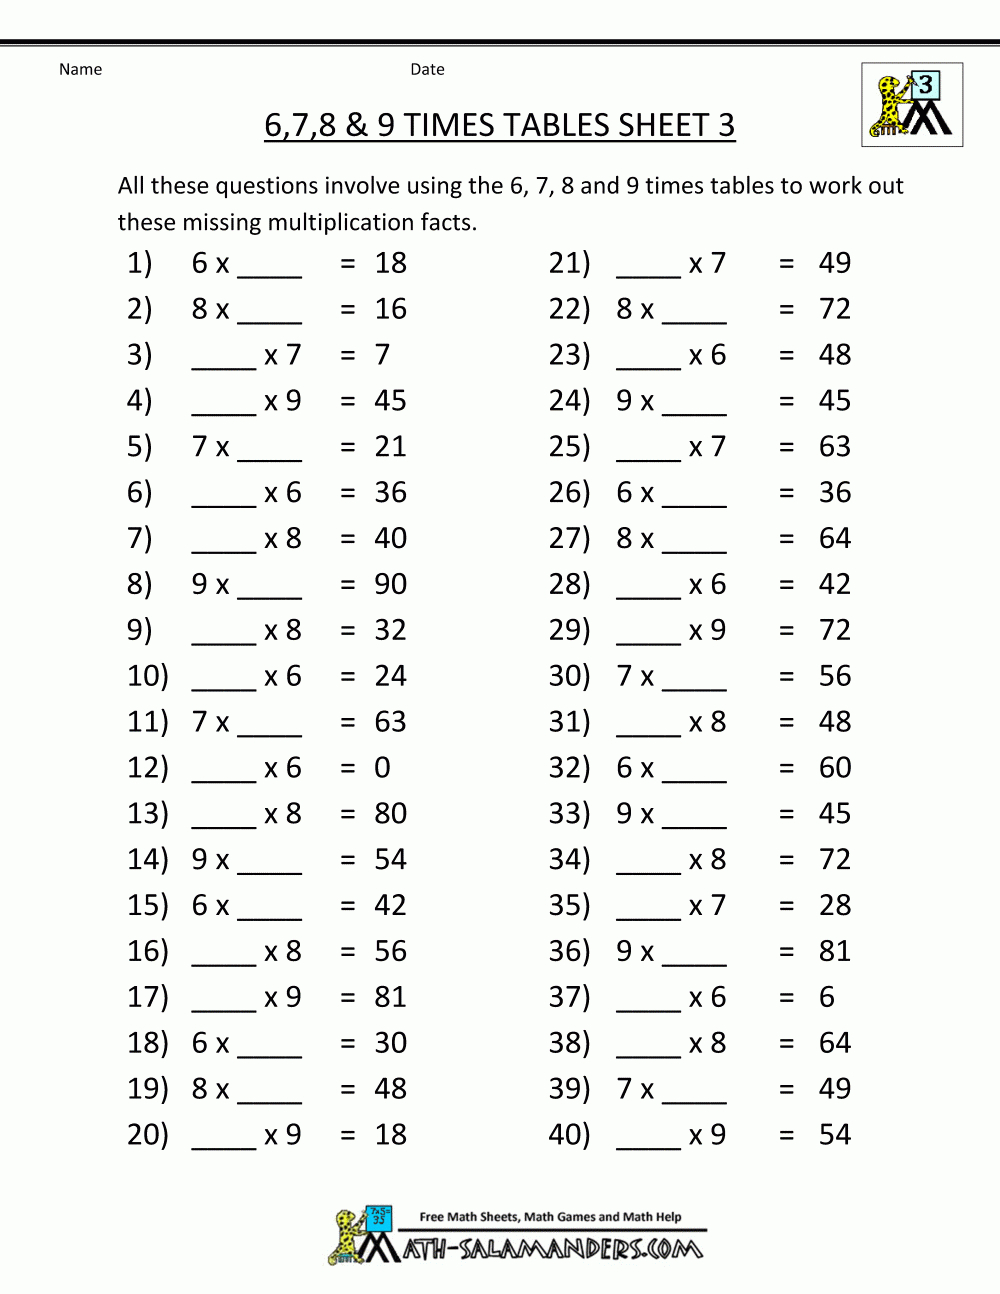 Free Multiplication Worksheets 6 7 8 9 Times Tables 3 intended for 6's Multiplication Worksheets